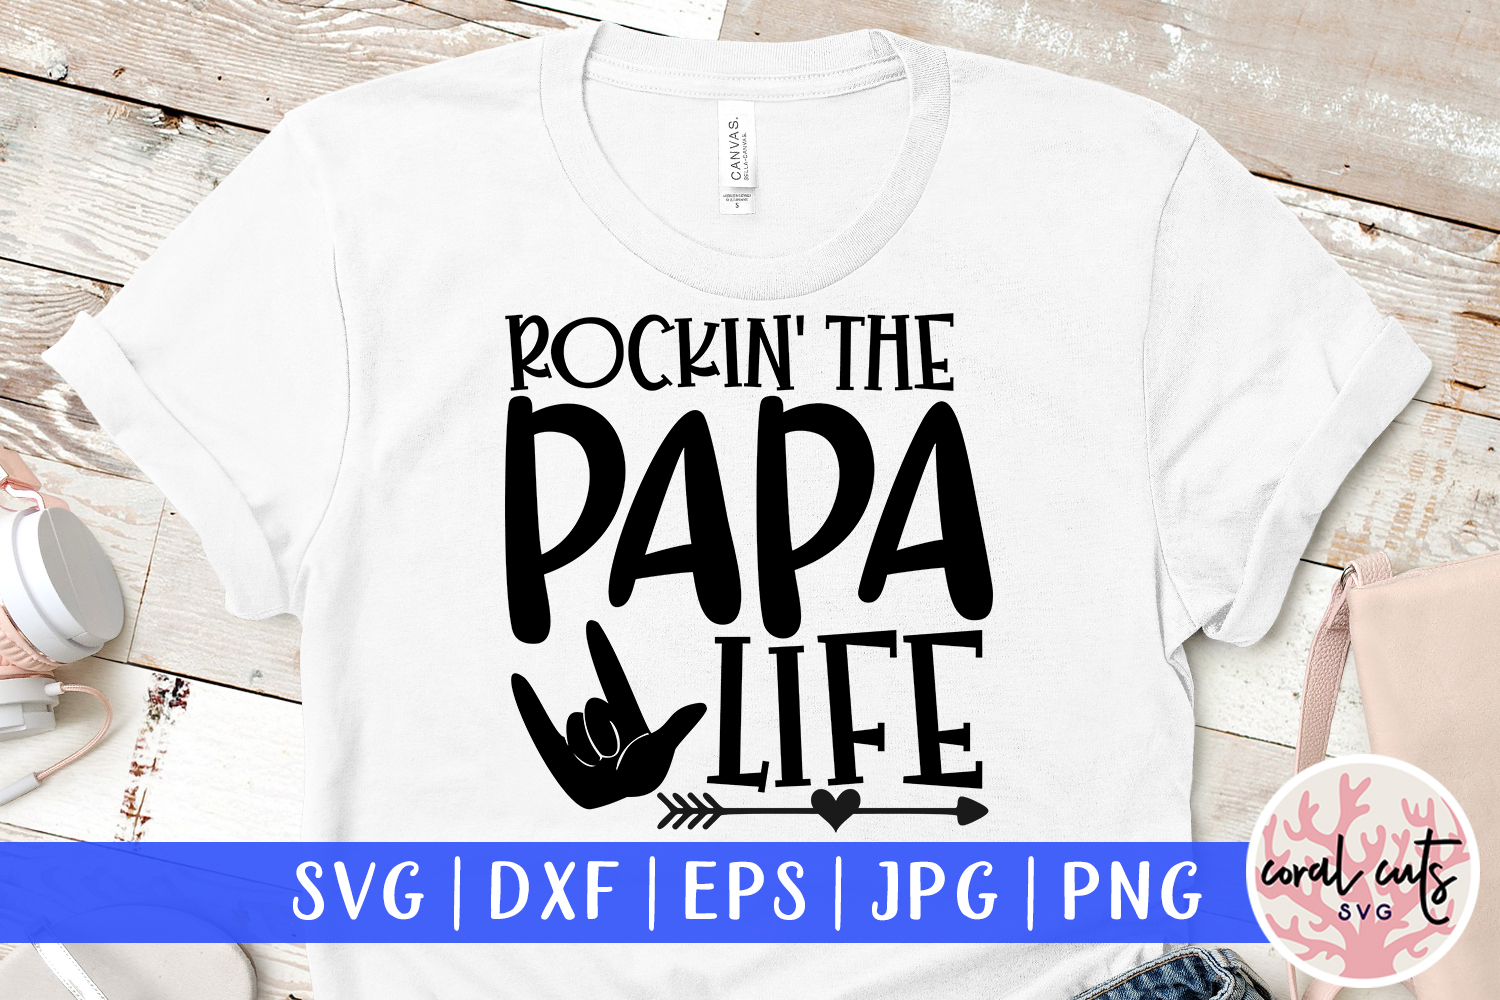 Download Rockin the papa life - Father SVG EPS DXF PNG Cutting File (257629) | Cut Files | Design Bundles